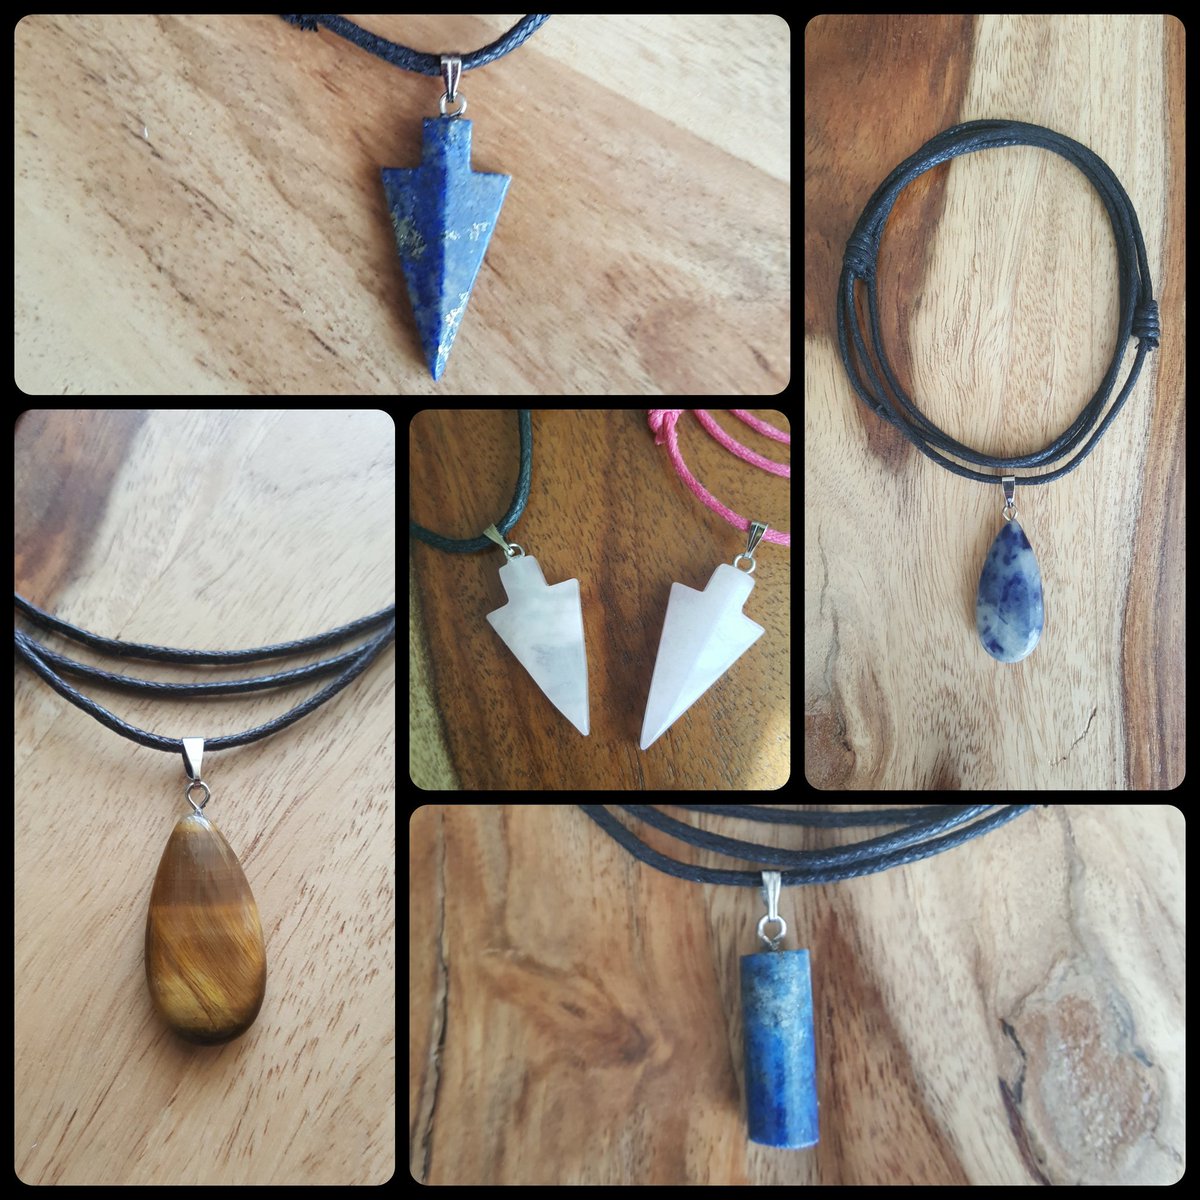 ☯Fiver Friday Deal!☯
These handmade natural #gemstonependants are only £5 each + p&p for today only!Choose from Lapis Lazuli,Rosequartz & Sodalite.Just pop me a message to take advantage!
#fiverfriday #etsy #handmadejewellery #smallbiz #sbutd #chakras #crystals #Bargains #SALE